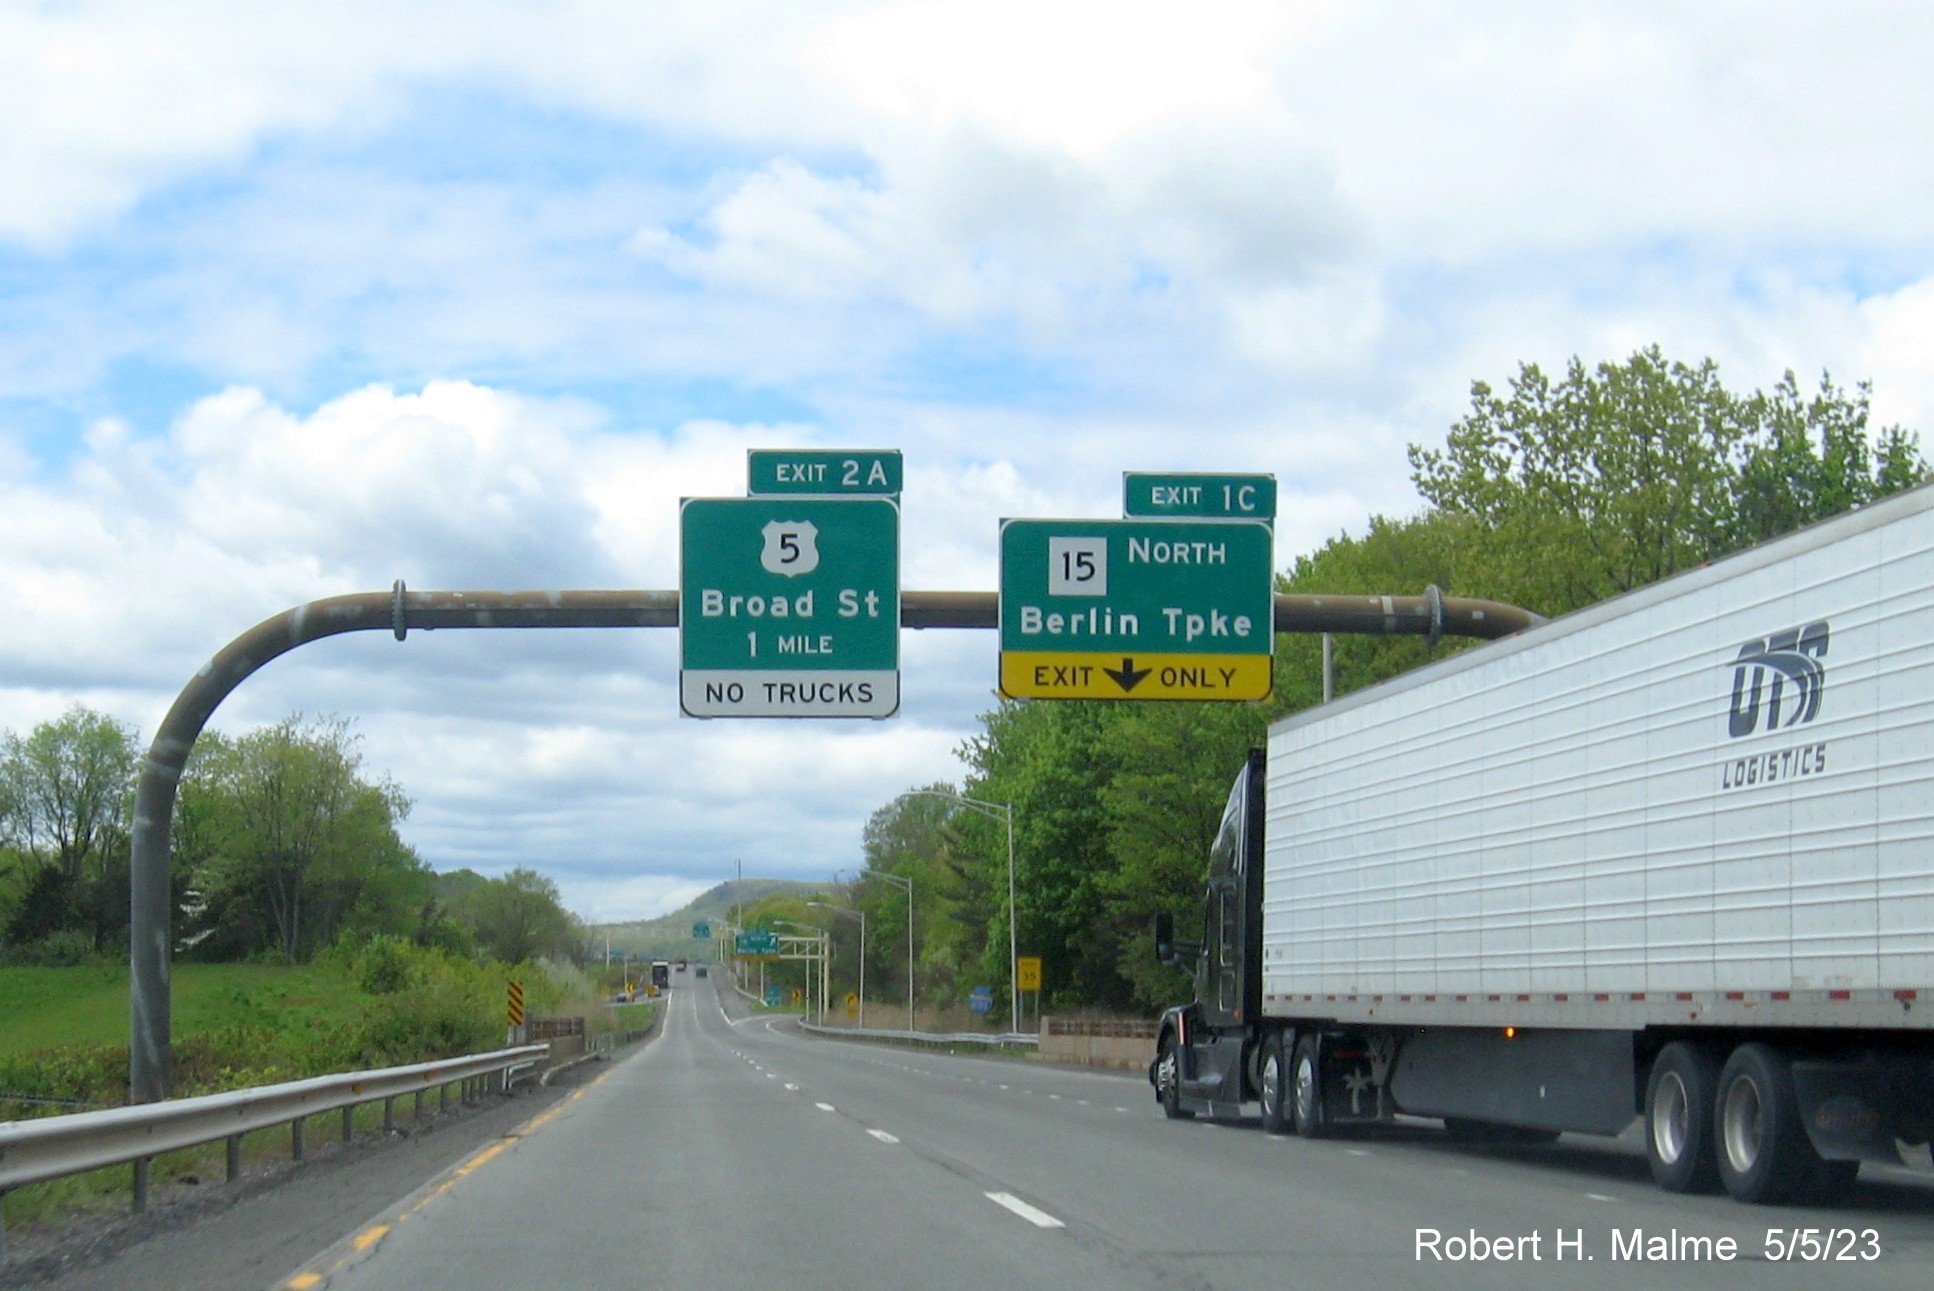 Image of overhead signage at ramp for CT 15 North exit with new milepost based exit number on I-691 West in Meriden CT, May 2023